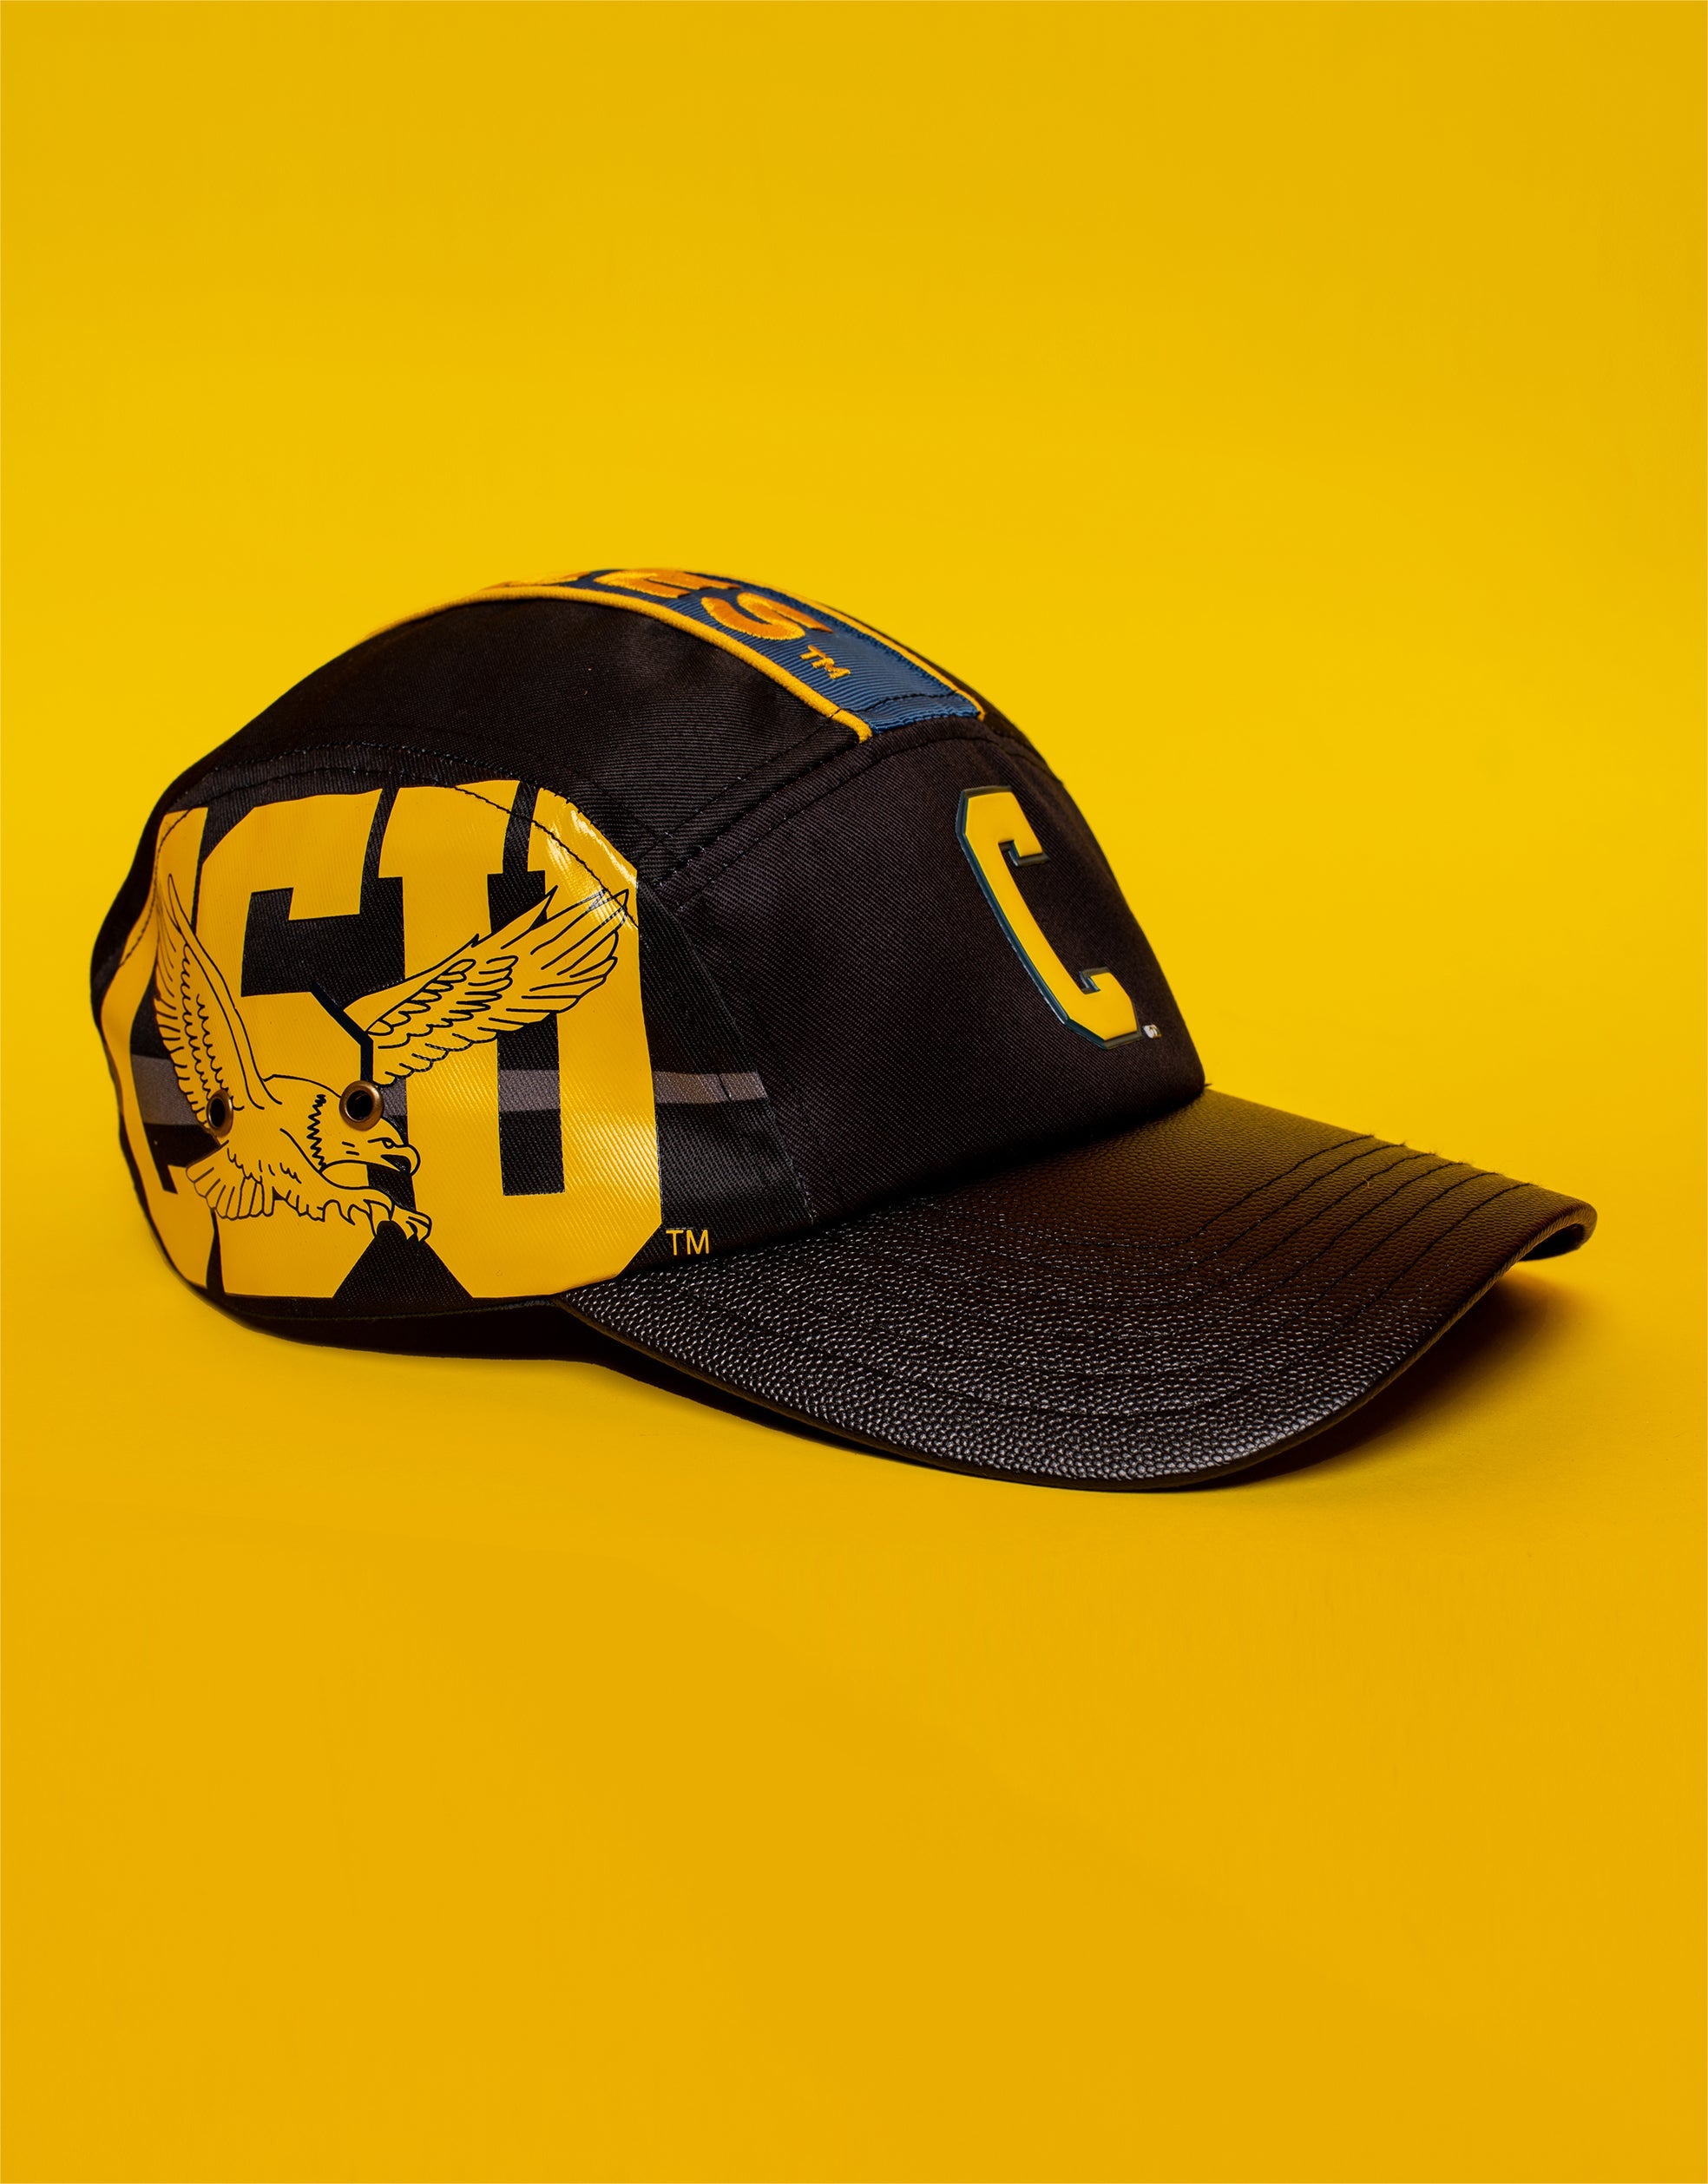 TheYard - BLACKOUT - Coppin State University - HBCU Hat